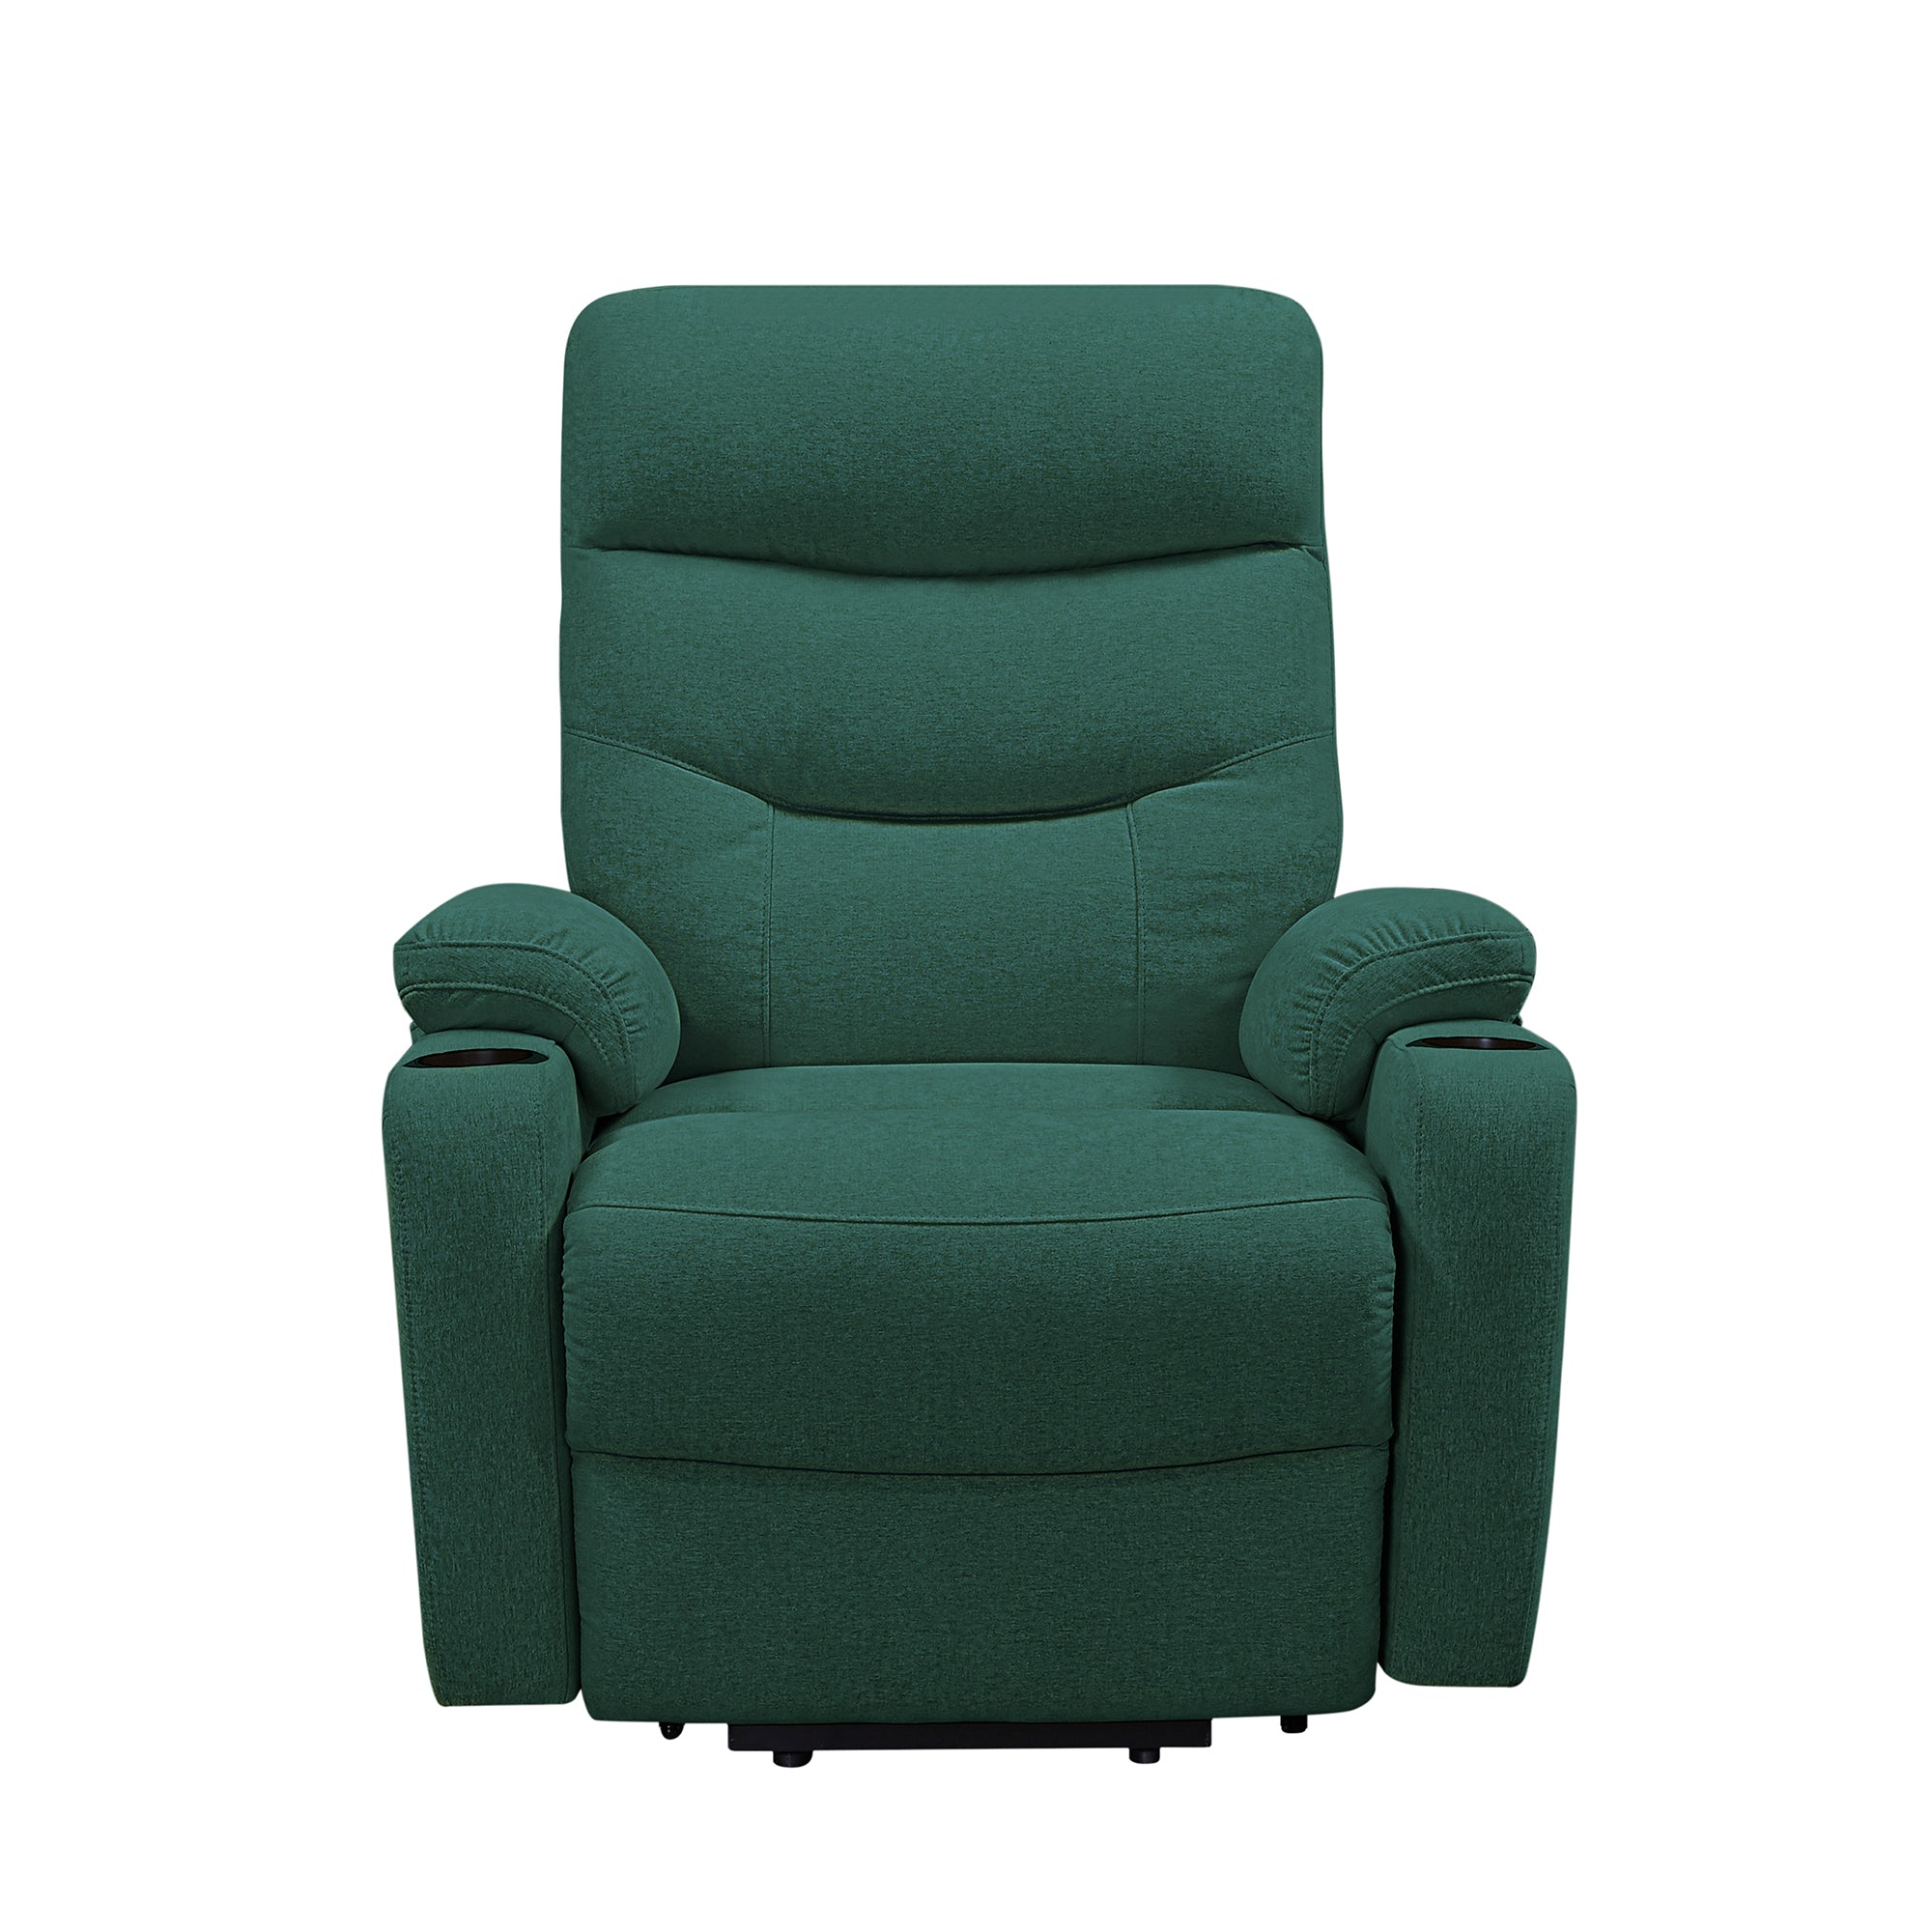 Green Power Lift Chair Front Profile